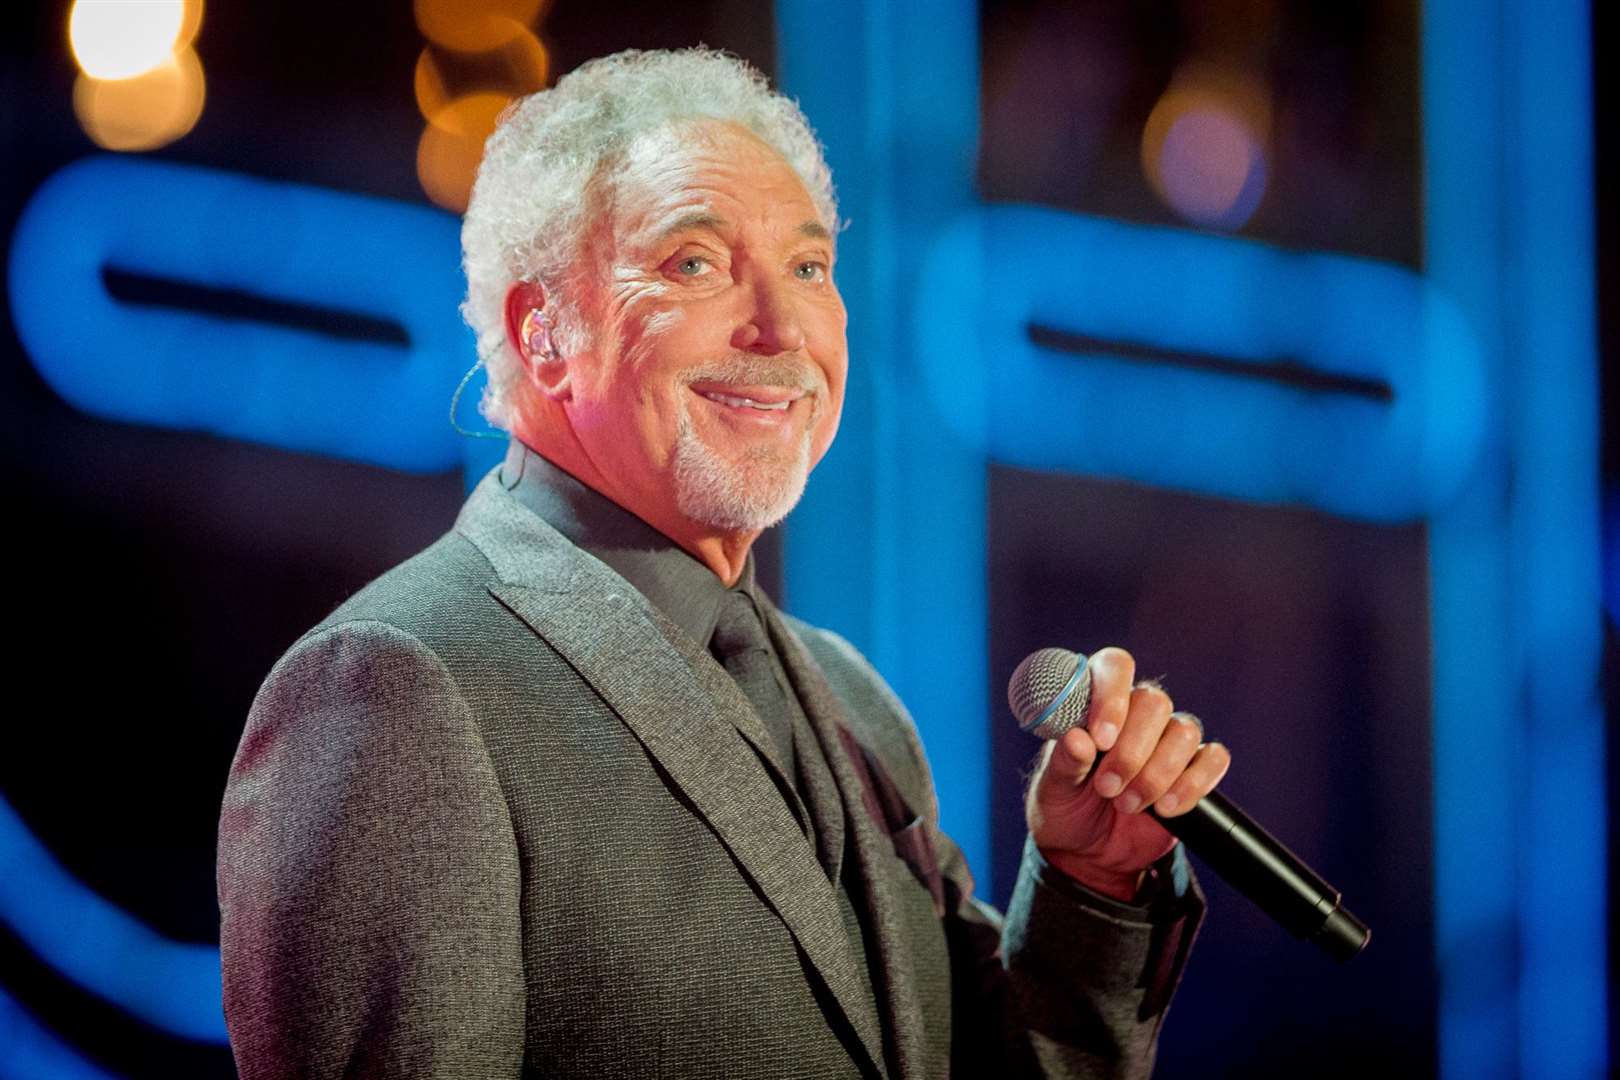 Sir Tom Jones will be joined by reality star and singer Megan McKenna at his concert at the Hop Farm in Paddock Wood